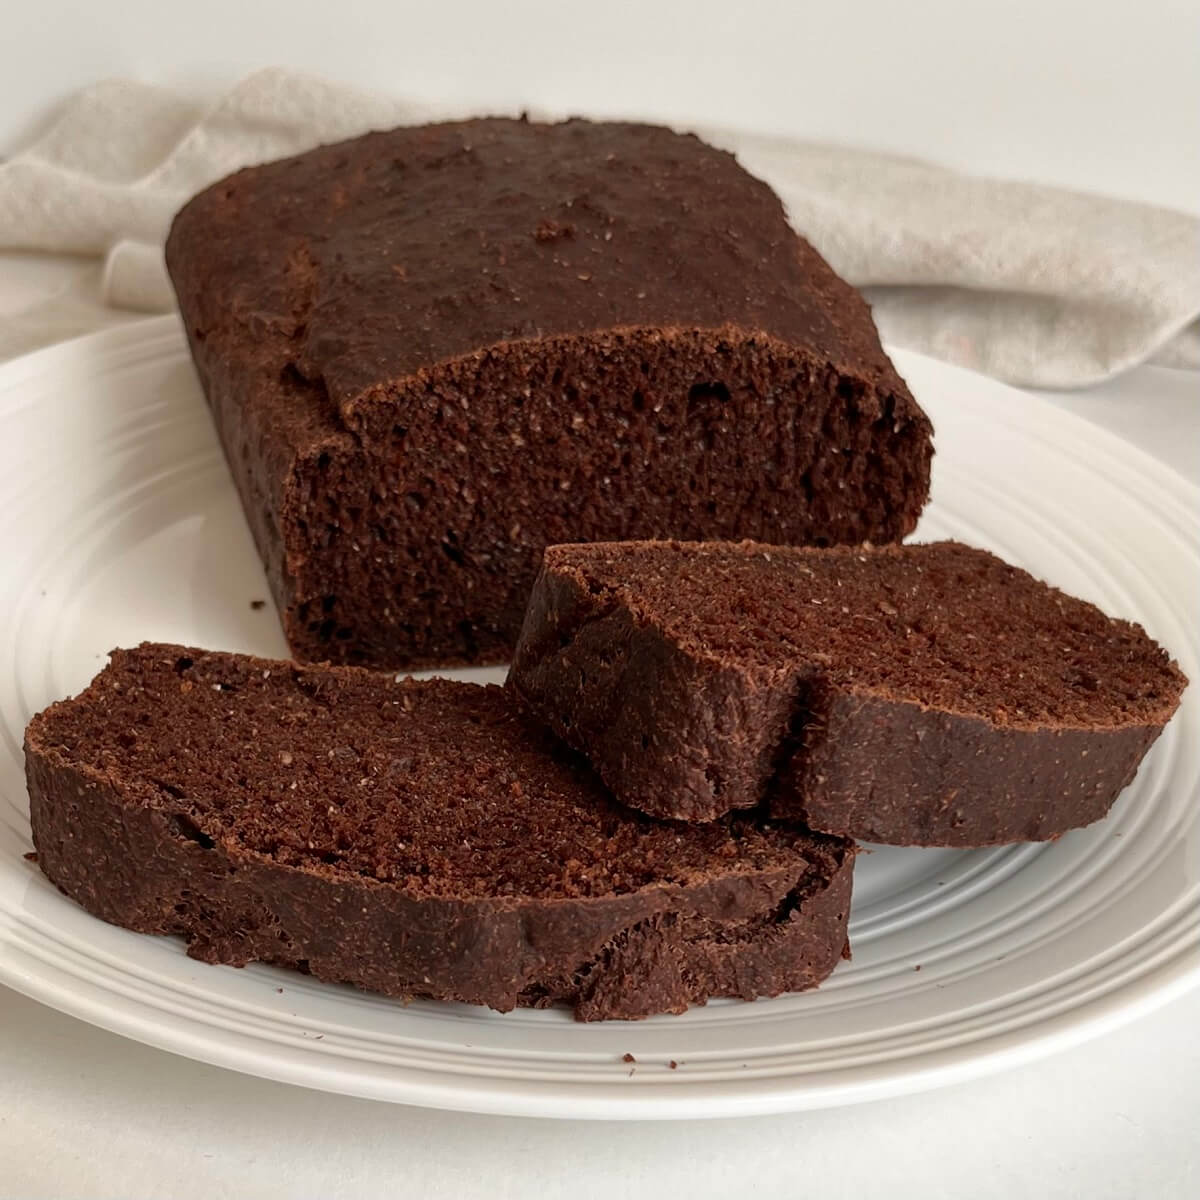 A loaf of vegan chocolate bread with two thick slices cut.